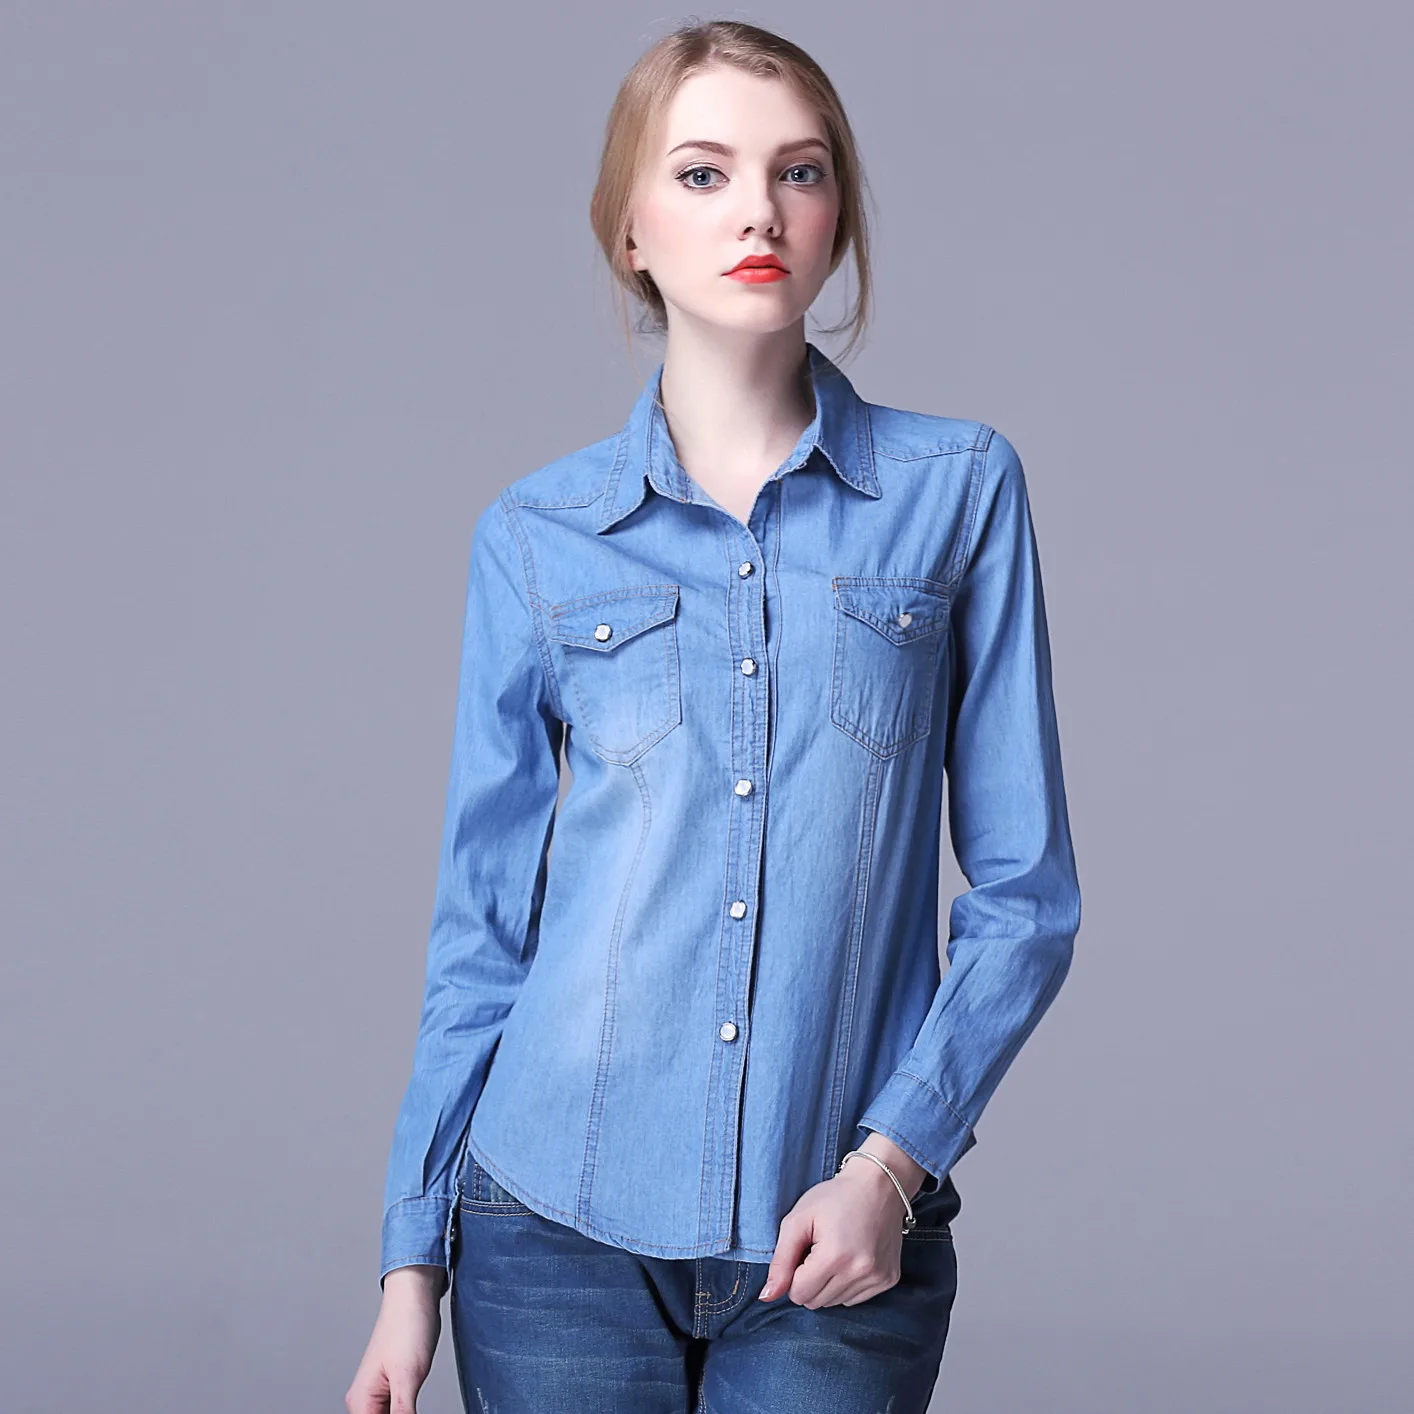 where to buy womens tops and jeans